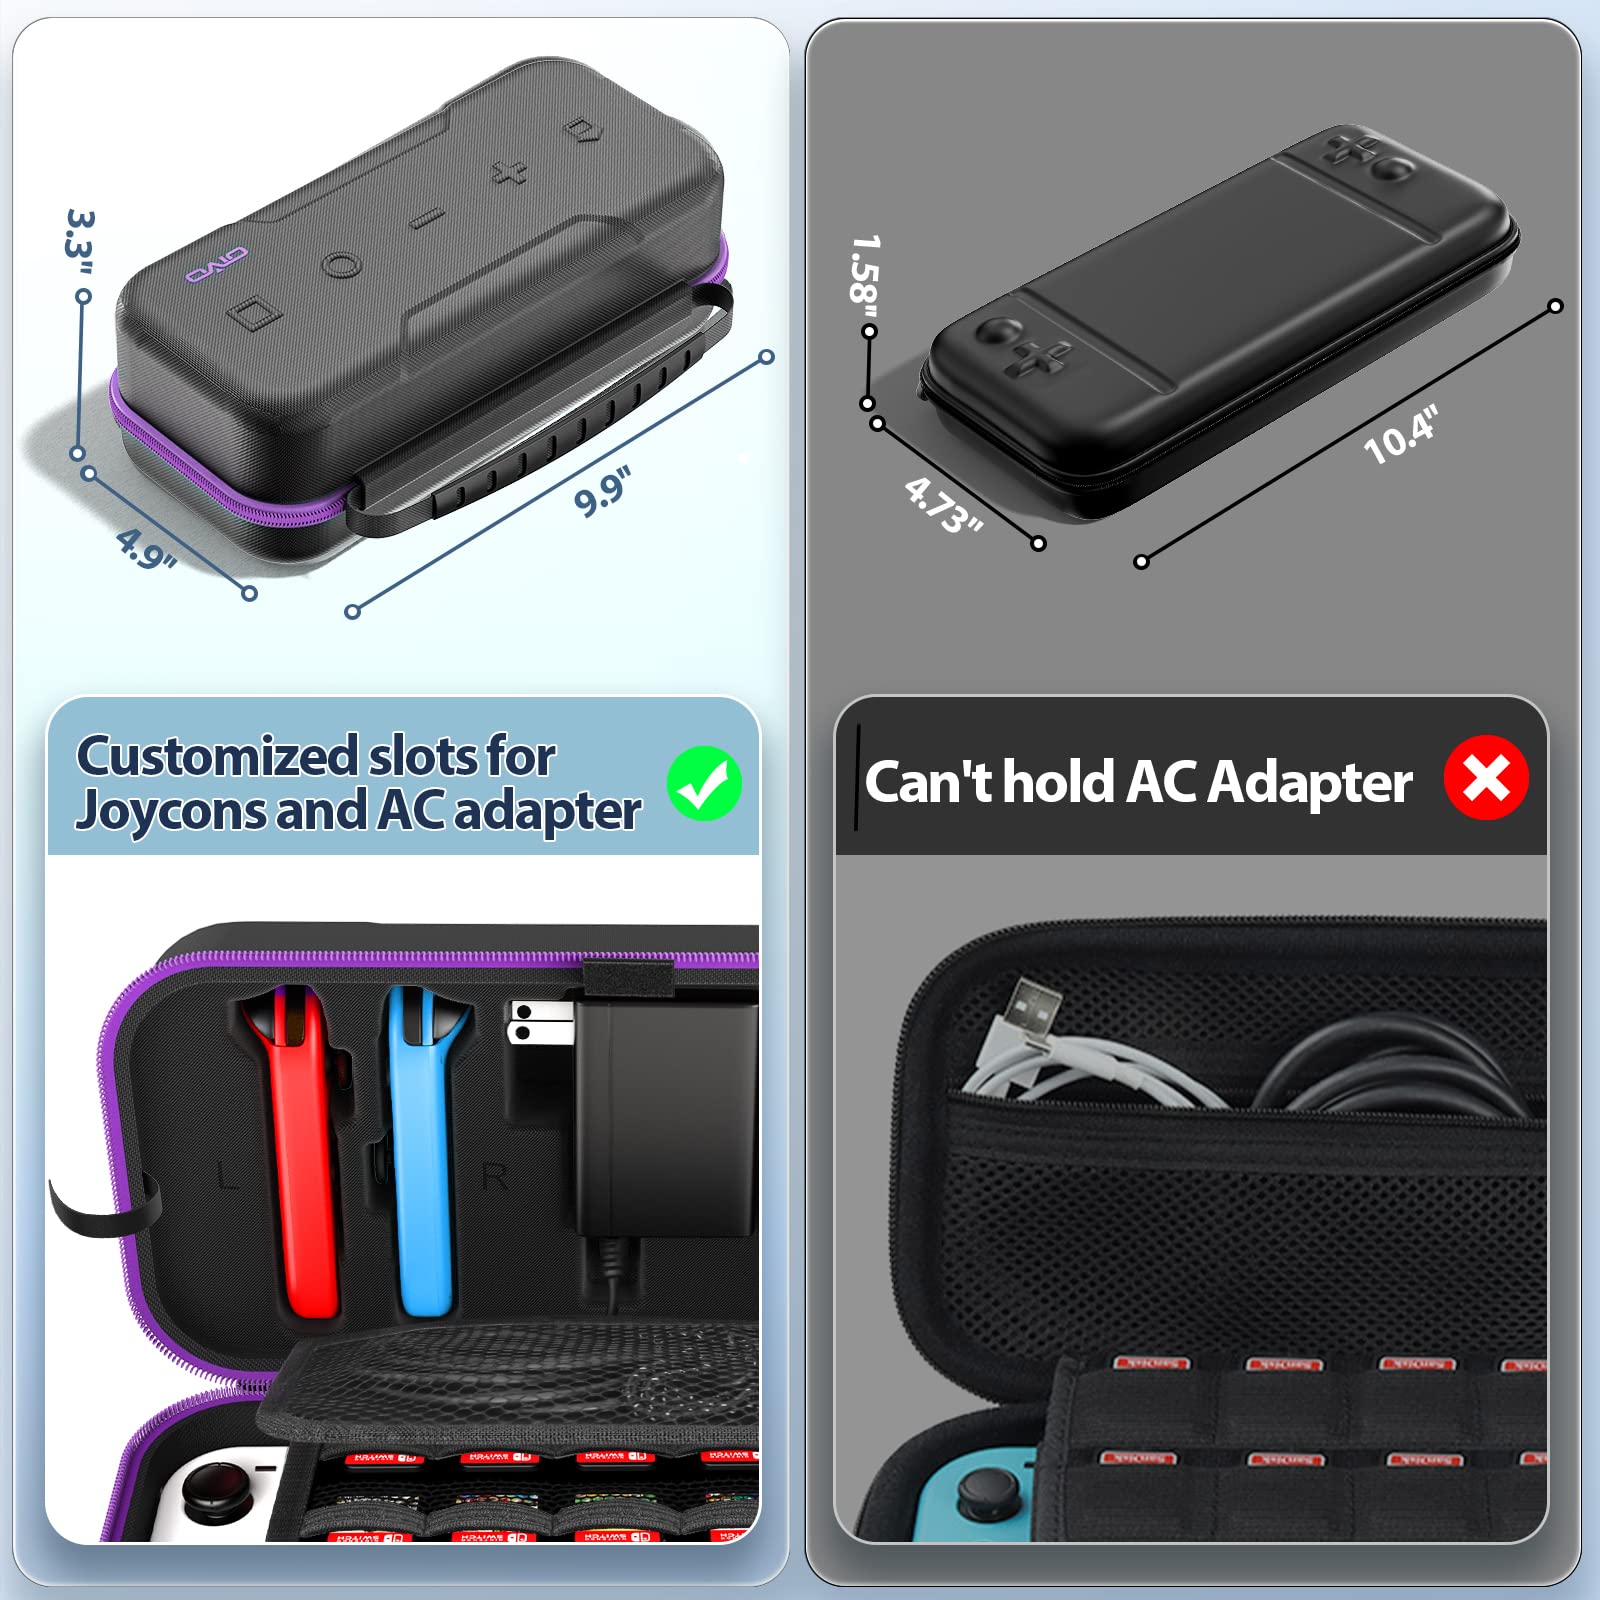 Switch OLED Carrying Case Compatible with Nintendo Switch/OLED Model, Portable Switch Travel Carry Case Fit for Joy-Con and Adapter, Hard Shell Protective Switch Pouch Case with 20 Games, Purple